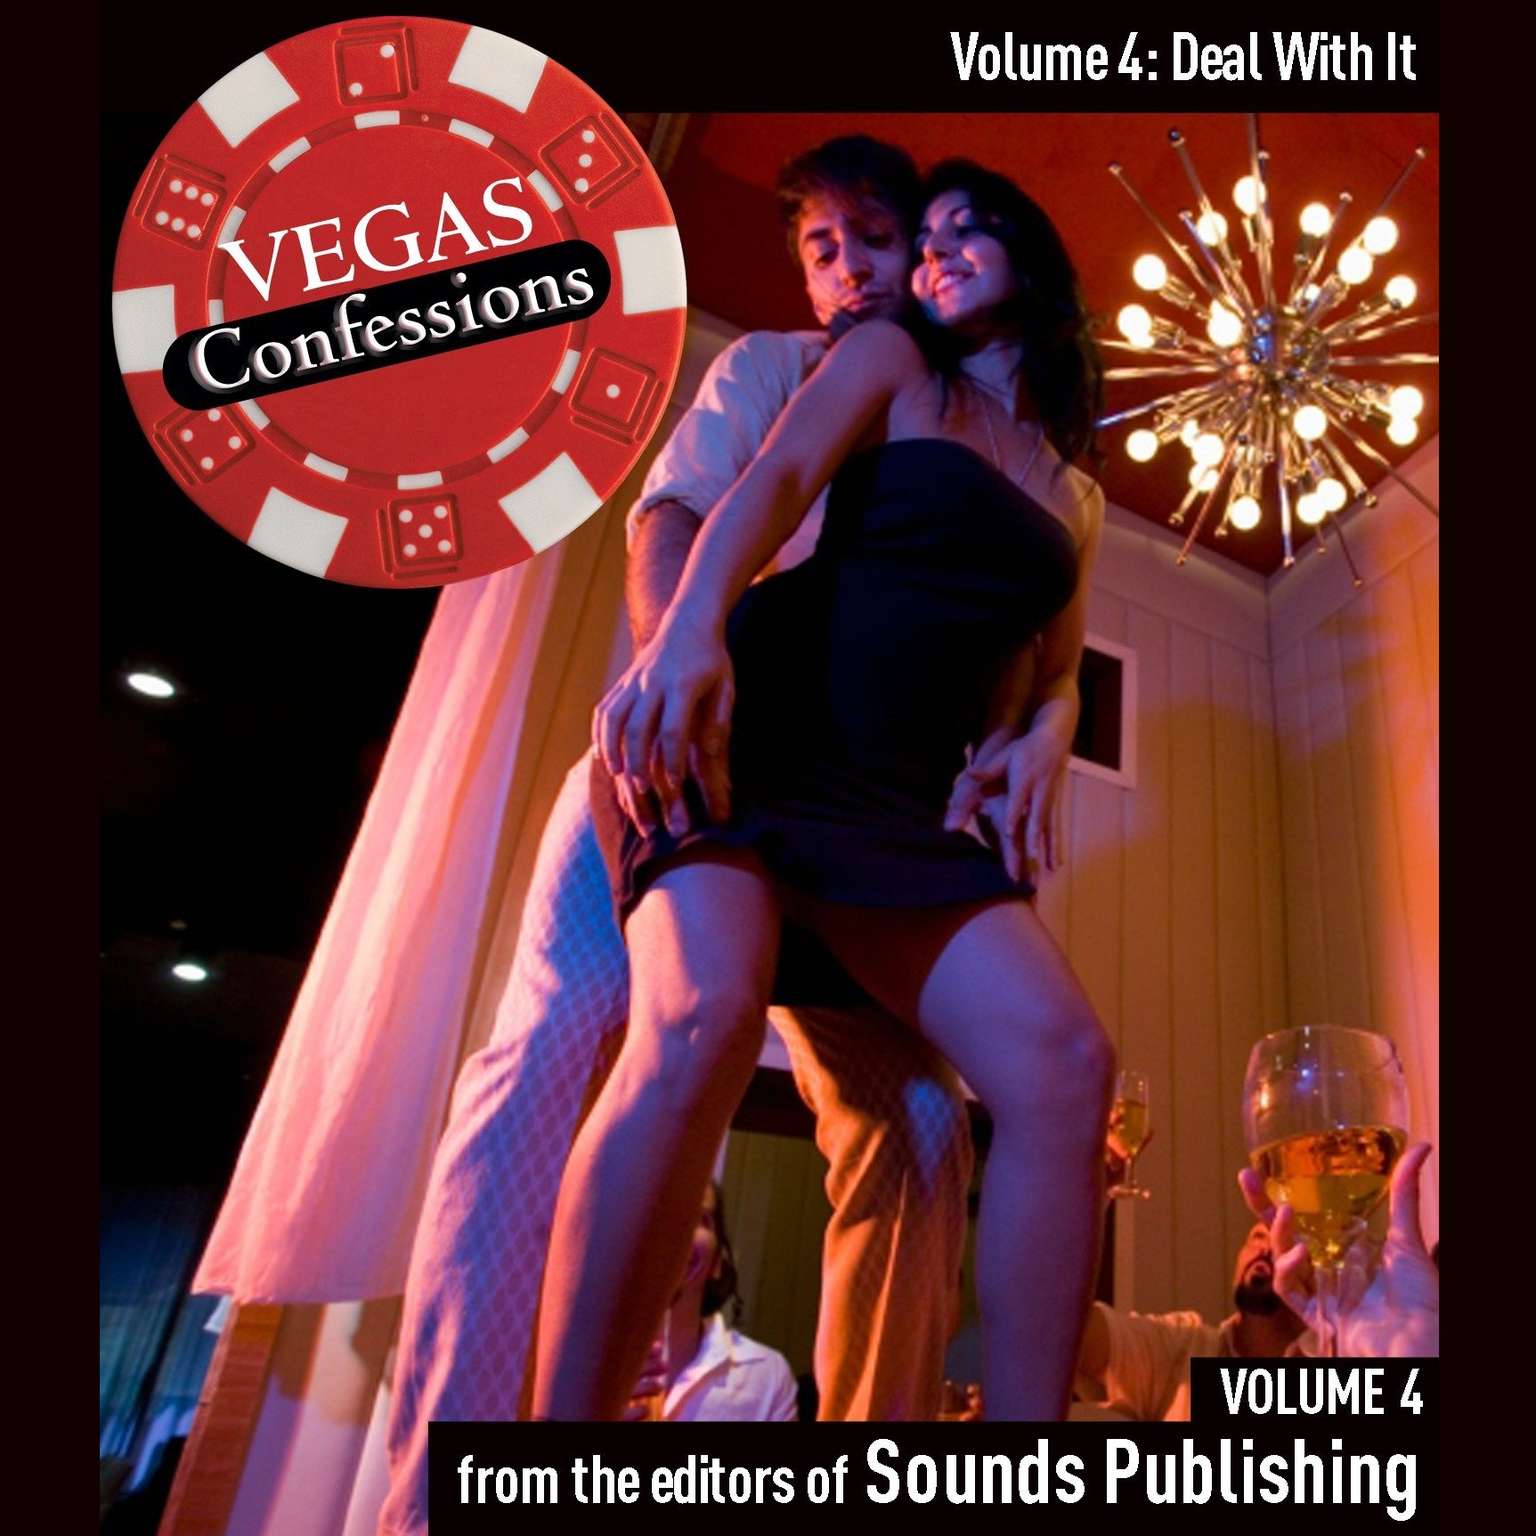 Vegas Confessions 4: Deal With It Audiobook, by The Editors of Sounds Publishing